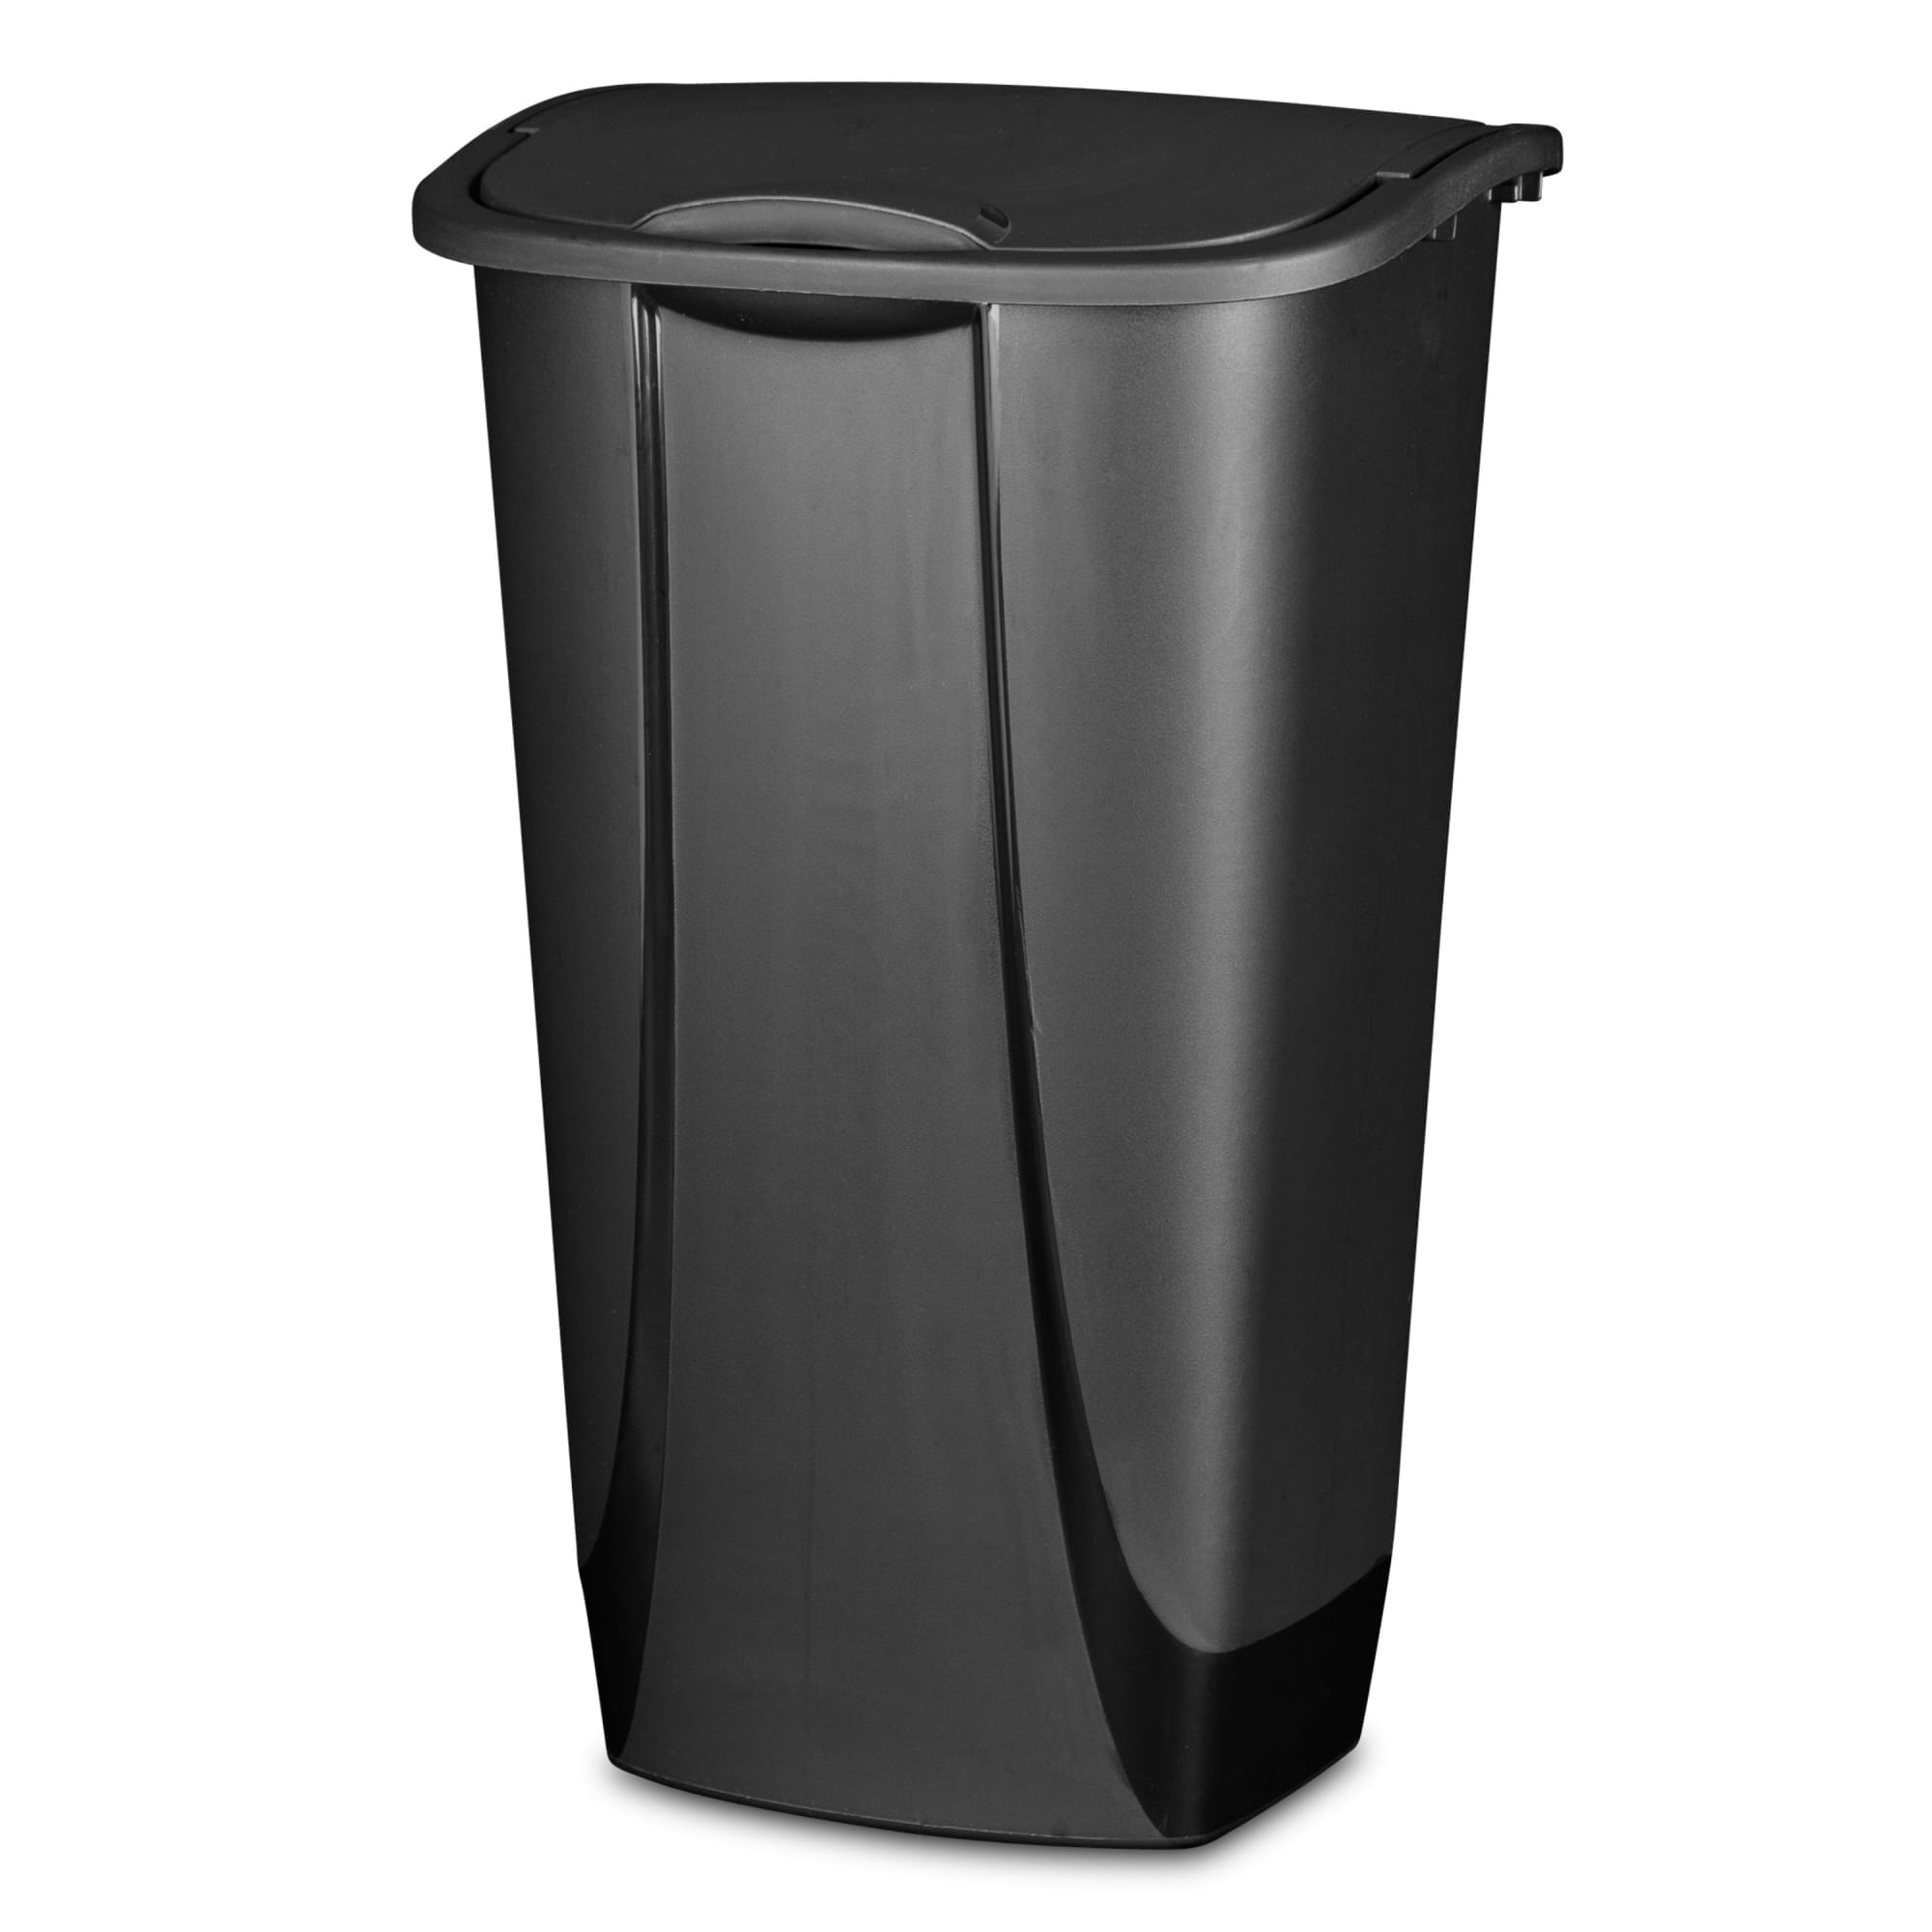 Sterilite Slim Trash Can with Lid, Step On 11 Gal White Kitchen